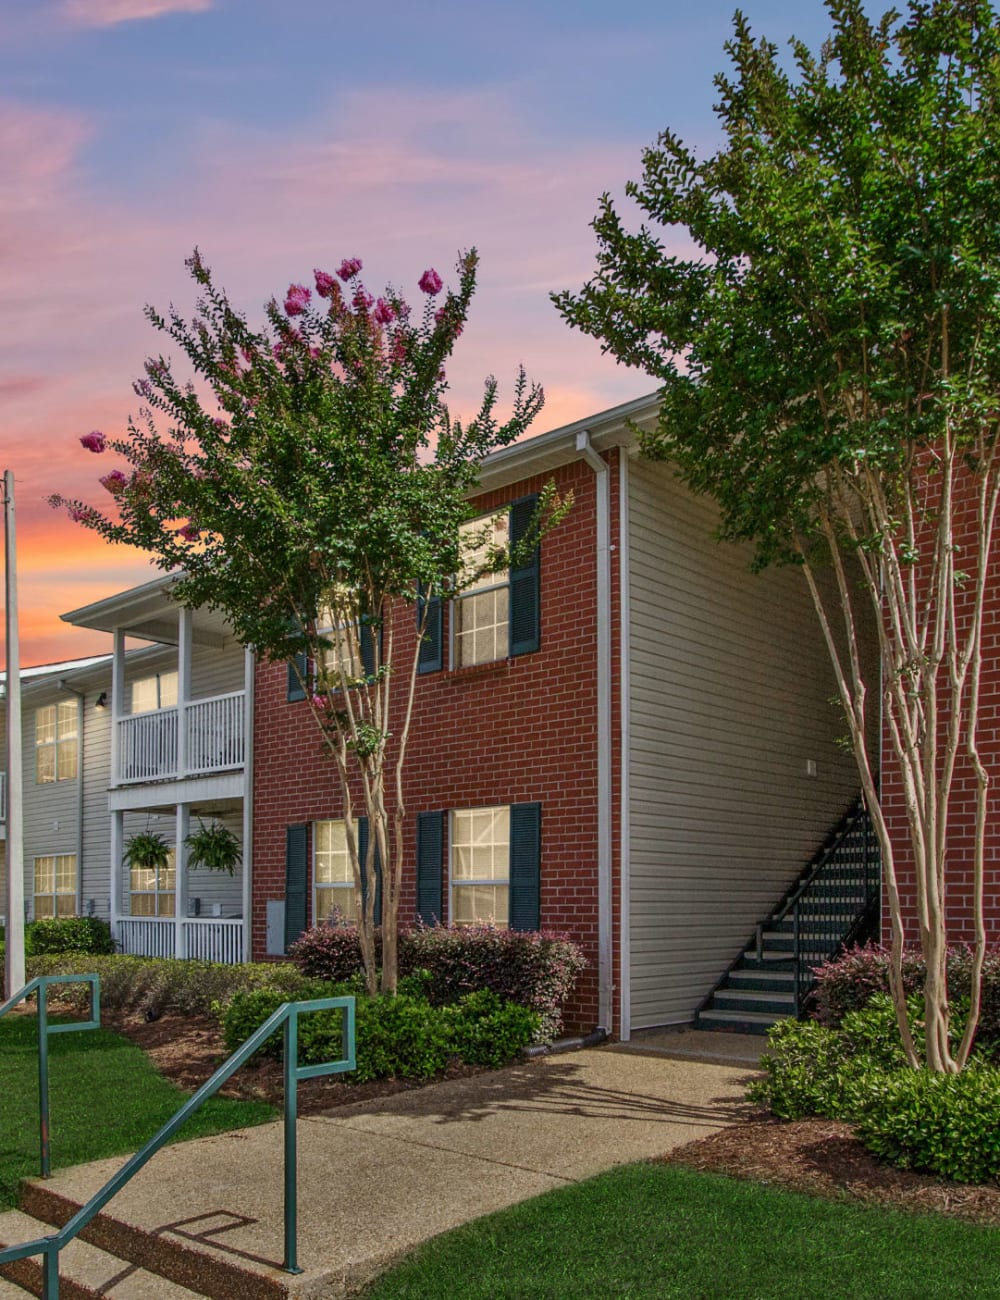 Exterior of an apartment building at dusk at The Gables in Ridgeland, Mississippi